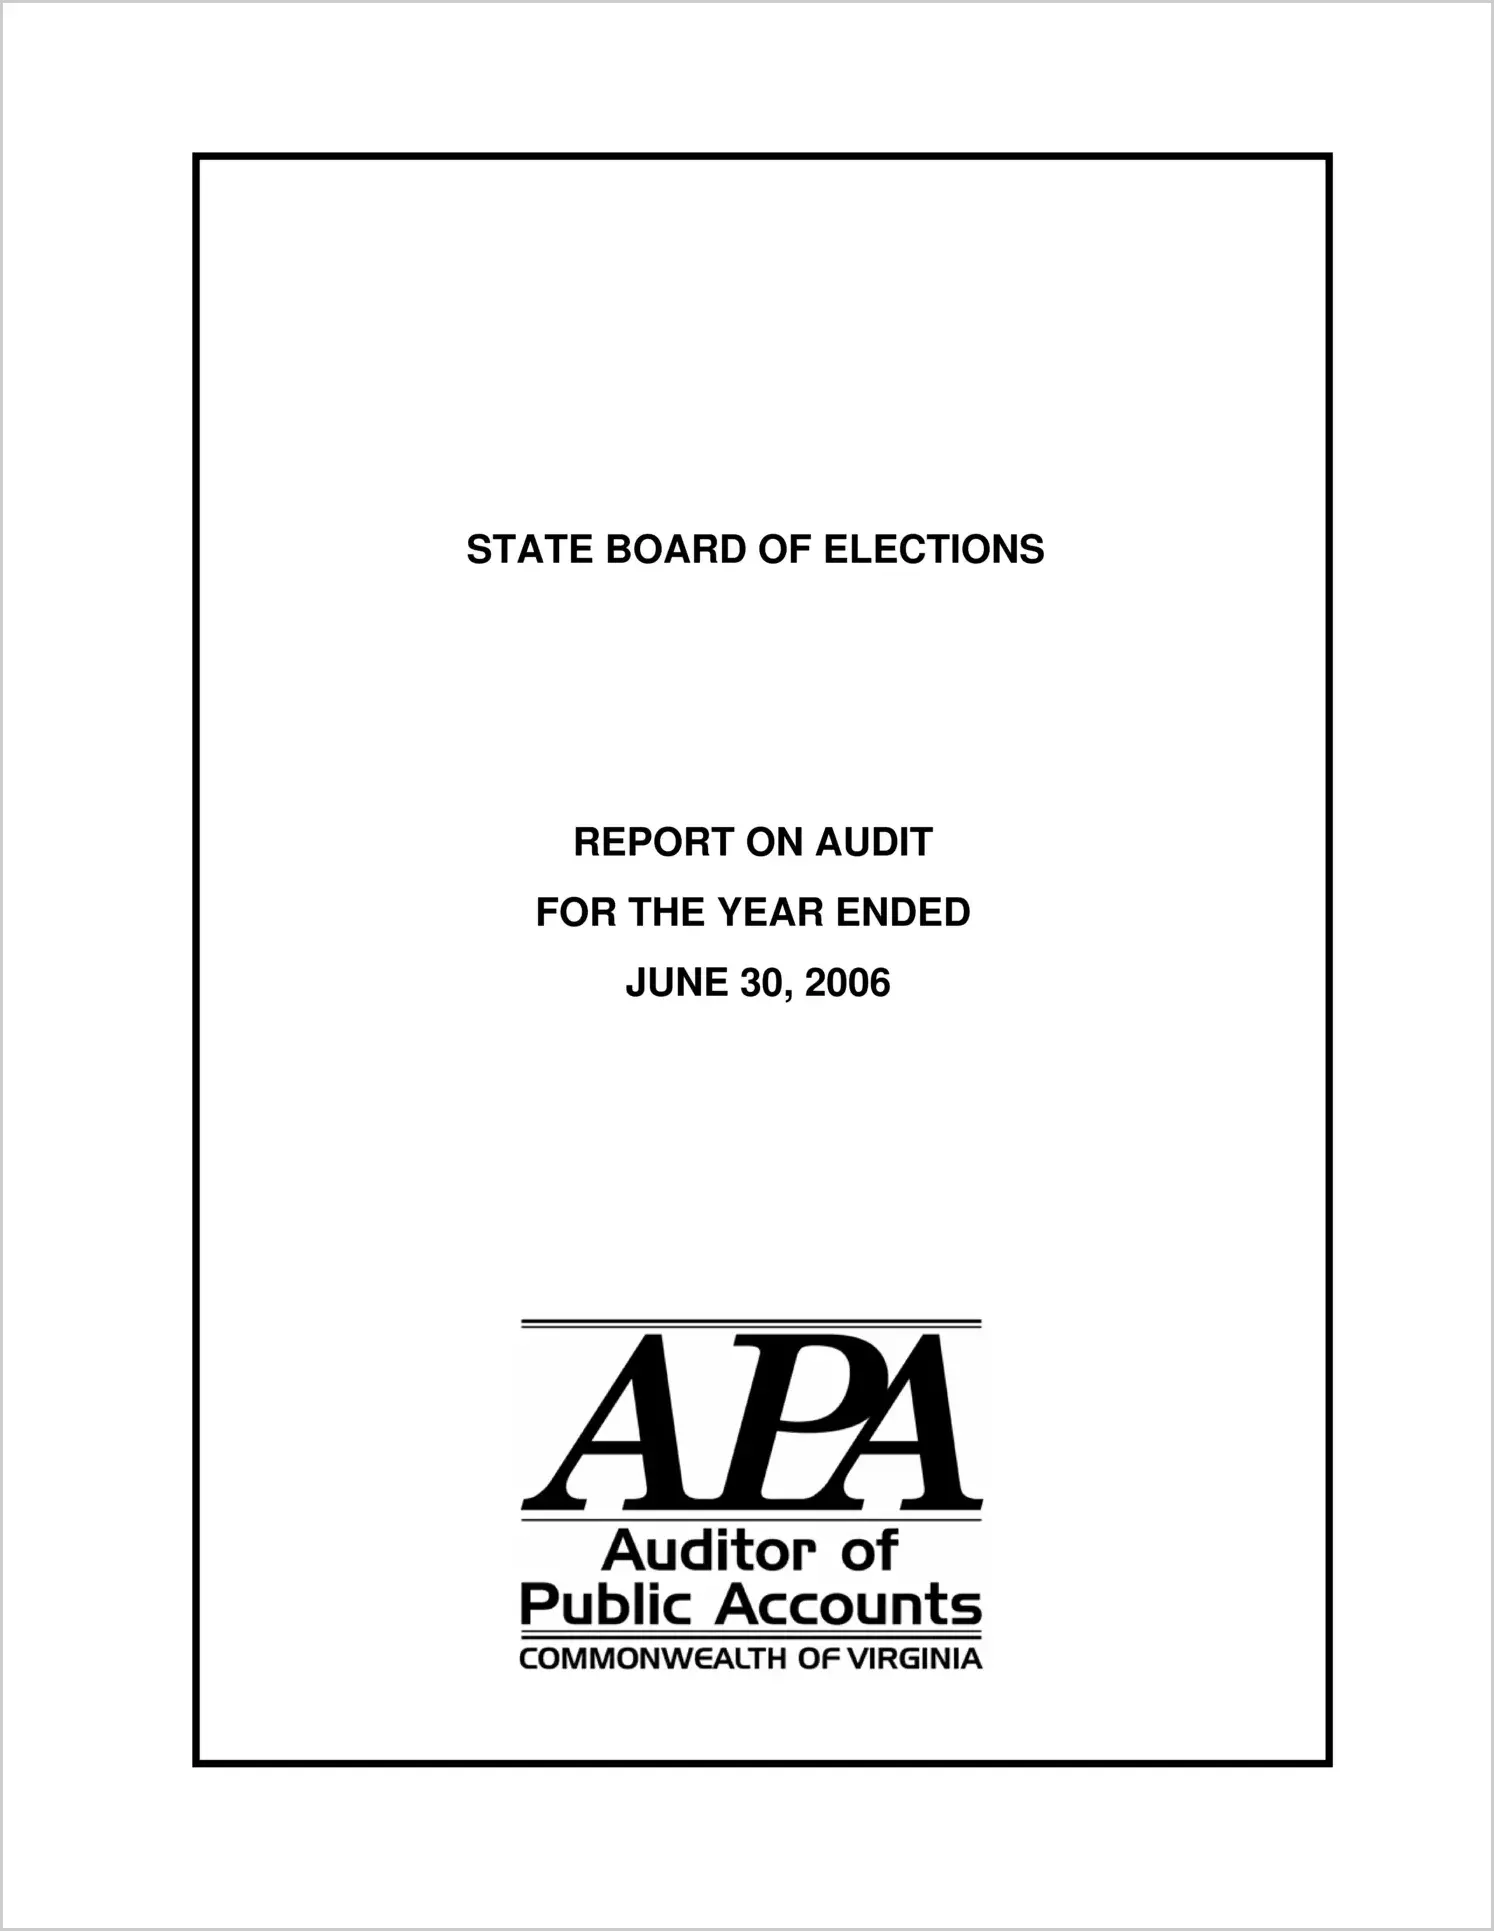 State Board of Elections For the year ended June 30, 2006